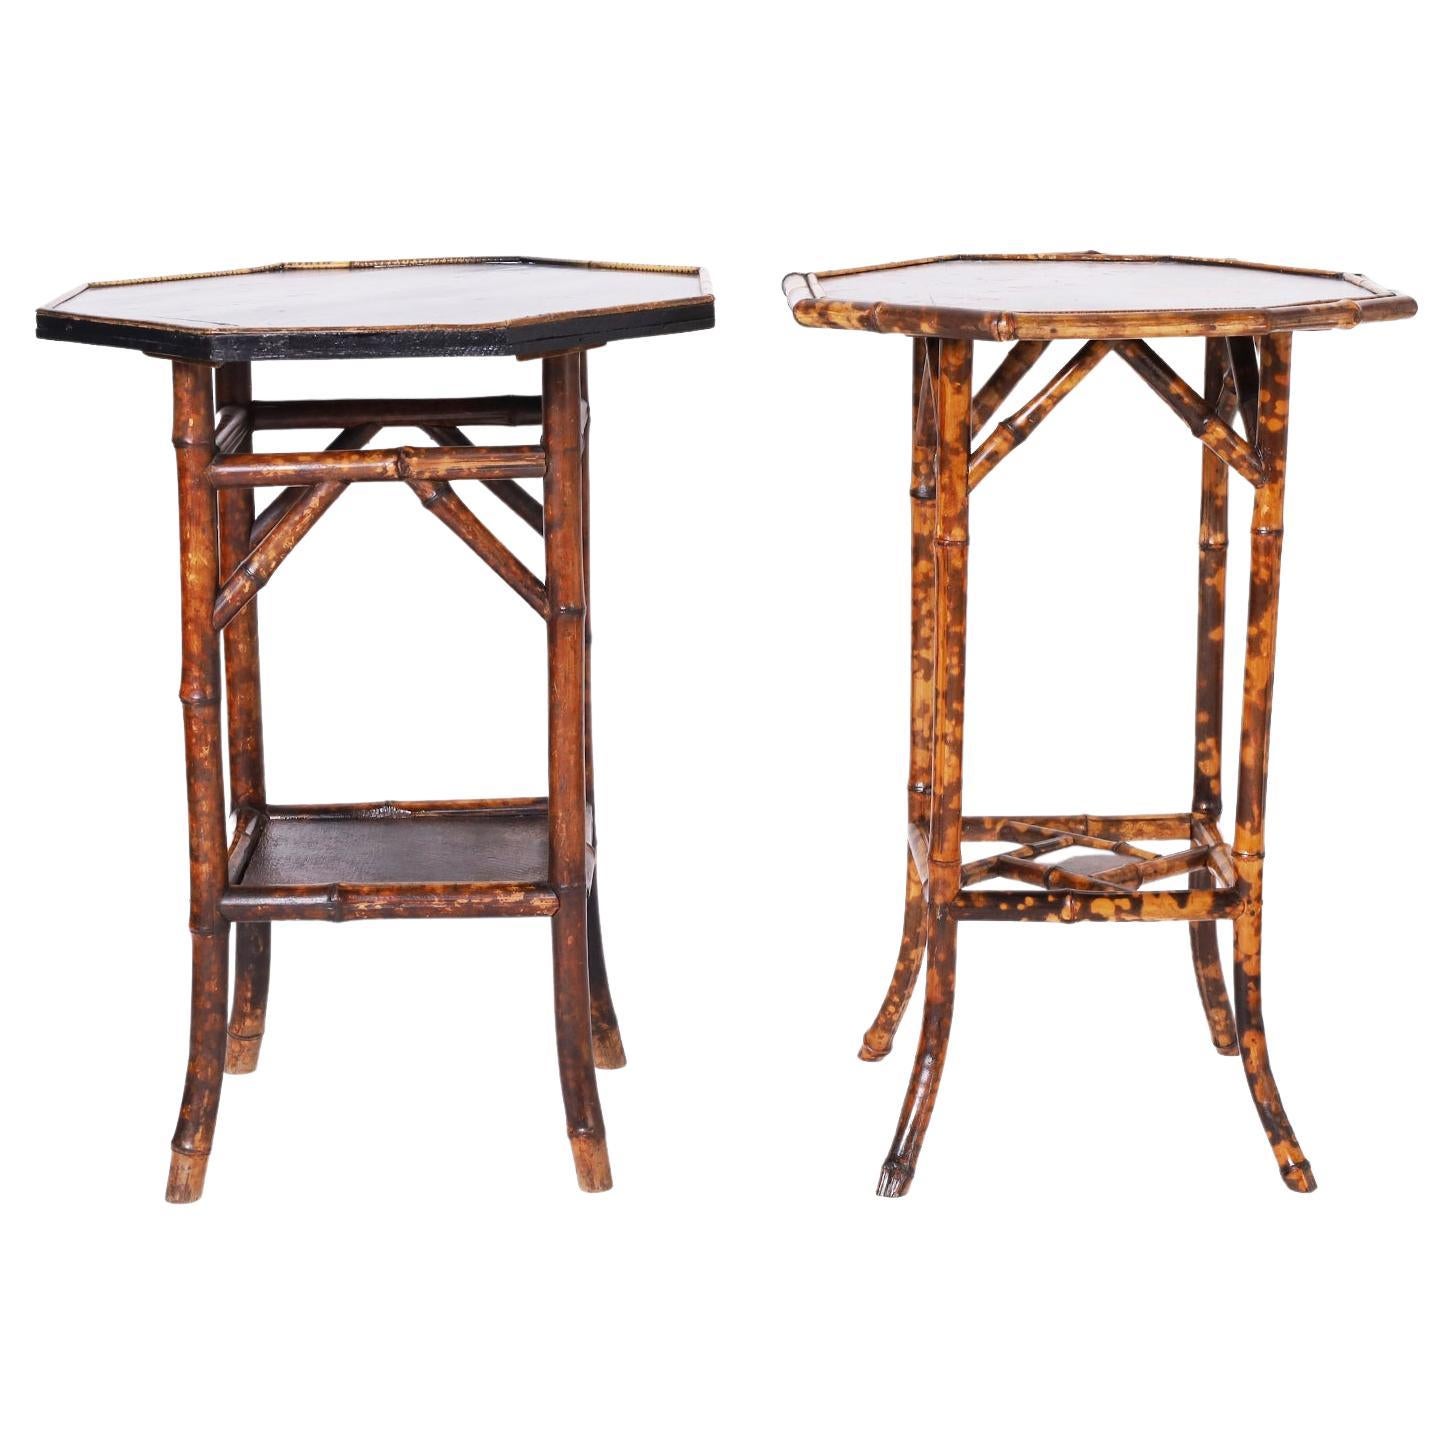 Two English Bamboo and Lacquer Stands or Tables